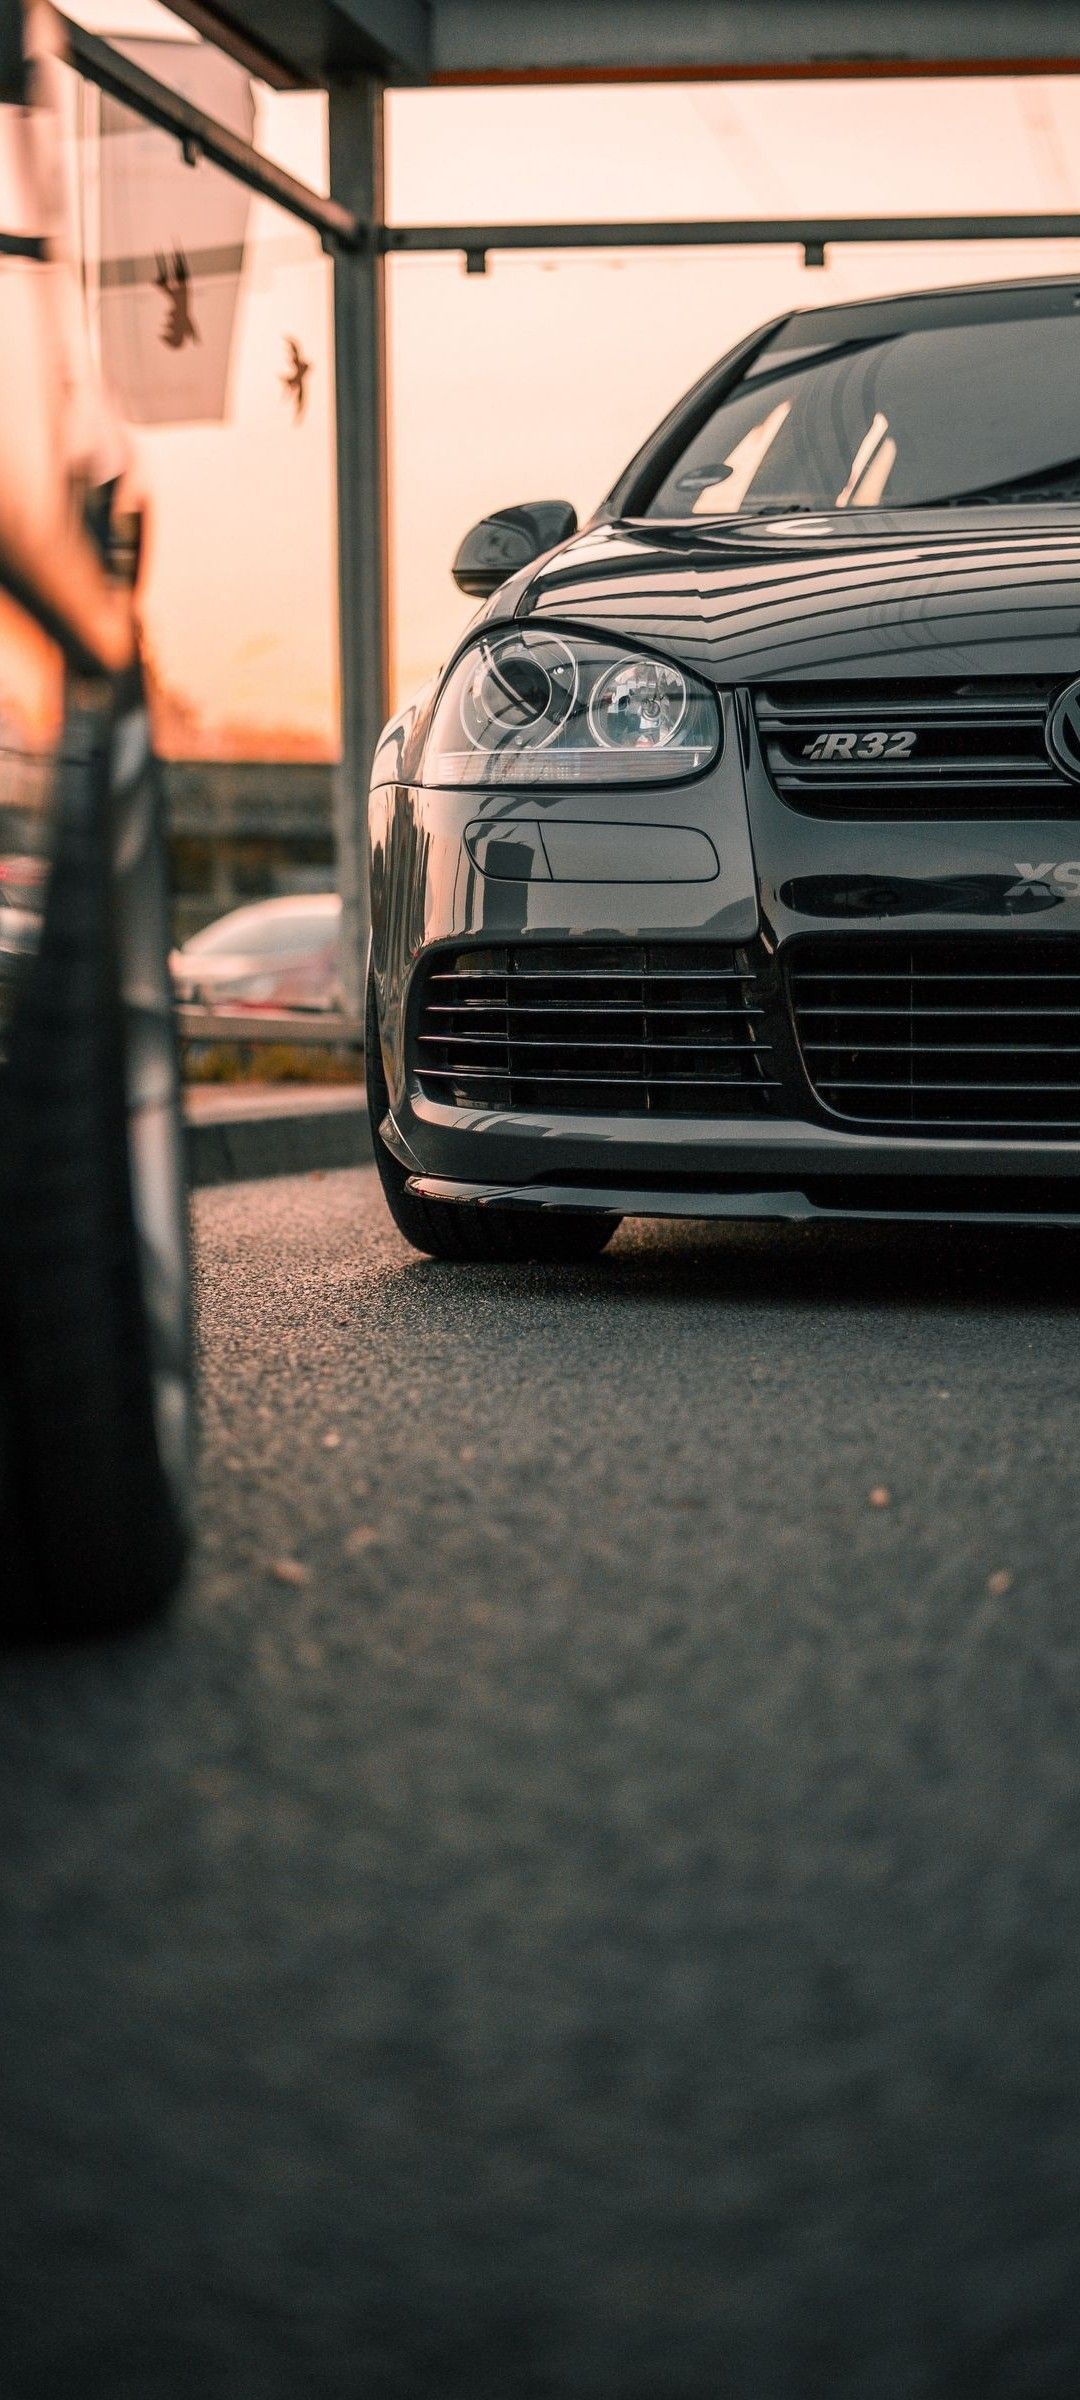 Volkswagen Jetta, Top free backgrounds, Stylish and elegant, Perfect for your iPhone, 1080x2400 HD Phone